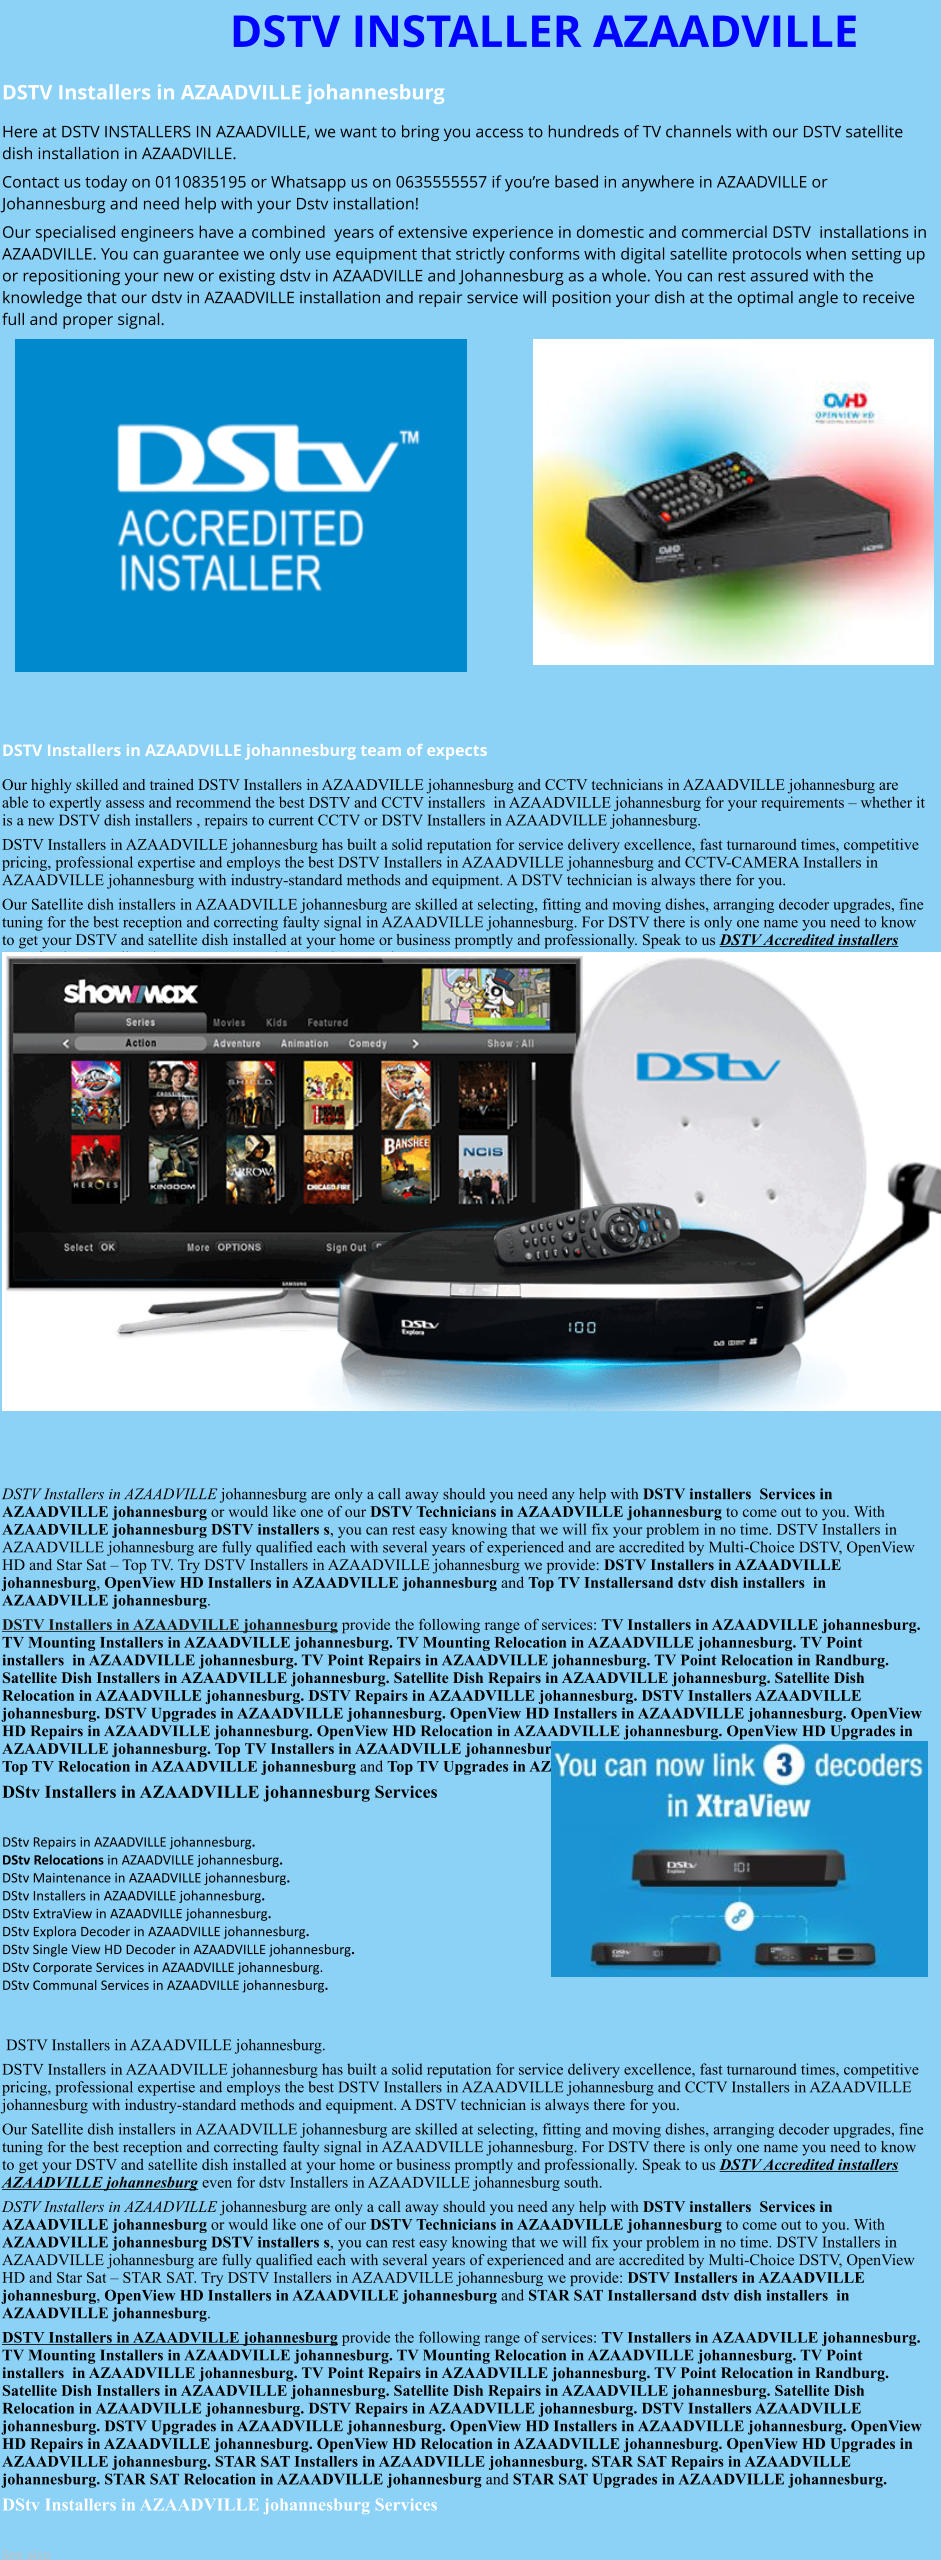 DSTV INSTALLER AZAADVILLE DSTV Installers in AZAADVILLE johannesburg  Here at DSTV INSTALLERS IN AZAADVILLE, we want to bring you access to hundreds of TV channels with our DSTV satellite dish installation in AZAADVILLE. Contact us today on 0110835195 or Whatsapp us on 0635555557 if you’re based in anywhere in AZAADVILLE or Johannesburg and need help with your Dstv installation! Our specialised engineers have a combined  years of extensive experience in domestic and commercial DSTV  installations in AZAADVILLE. You can guarantee we only use equipment that strictly conforms with digital satellite protocols when setting up or repositioning your new or existing dstv in AZAADVILLE and Johannesburg as a whole. You can rest assured with the knowledge that our dstv in AZAADVILLE installation and repair service will position your dish at the optimal angle to receive full and proper signal.                 DSTV Installers in AZAADVILLE johannesburg team of expects Our highly skilled and trained DSTV Installers in AZAADVILLE johannesburg and CCTV technicians in AZAADVILLE johannesburg are able to expertly assess and recommend the best DSTV and CCTV installers  in AZAADVILLE johannesburg for your requirements – whether it is a new DSTV dish installers , repairs to current CCTV or DSTV Installers in AZAADVILLE johannesburg. DSTV Installers in AZAADVILLE johannesburg has built a solid reputation for service delivery excellence, fast turnaround times, competitive pricing, professional expertise and employs the best DSTV Installers in AZAADVILLE johannesburg and CCTV-CAMERA Installers in AZAADVILLE johannesburg with industry-standard methods and equipment. A DSTV technician is always there for you. Our Satellite dish installers in AZAADVILLE johannesburg are skilled at selecting, fitting and moving dishes, arranging decoder upgrades, fine tuning for the best reception and correcting faulty signal in AZAADVILLE johannesburg. For DSTV there is only one name you need to know to get your DSTV and satellite dish installed at your home or business promptly and professionally. Speak to us DSTV Accredited installers even for dstv Installers in AZAADVILLE johannesburg south.                      DSTV Installers in AZAADVILLE johannesburg are only a call away should you need any help with DSTV installers  Services in AZAADVILLE johannesburg or would like one of our DSTV Technicians in AZAADVILLE johannesburg to come out to you. With AZAADVILLE johannesburg DSTV installers s, you can rest easy knowing that we will fix your problem in no time. DSTV Installers in AZAADVILLE johannesburg are fully qualified each with several years of experienced and are accredited by Multi-Choice DSTV, OpenView HD and Star Sat – Top TV. Try DSTV Installers in AZAADVILLE johannesburg we provide: DSTV Installers in AZAADVILLE johannesburg, OpenView HD Installers in AZAADVILLE johannesburg and Top TV Installersand dstv dish installers  in AZAADVILLE johannesburg. DSTV Installers in AZAADVILLE johannesburg provide the following range of services: TV Installers in AZAADVILLE johannesburg. TV Mounting Installers in AZAADVILLE johannesburg. TV Mounting Relocation in AZAADVILLE johannesburg. TV Point installers  in AZAADVILLE johannesburg. TV Point Repairs in AZAADVILLE johannesburg. TV Point Relocation in Randburg. Satellite Dish Installers in AZAADVILLE johannesburg. Satellite Dish Repairs in AZAADVILLE johannesburg. Satellite Dish Relocation in AZAADVILLE johannesburg. DSTV Repairs in AZAADVILLE johannesburg. DSTV Installers AZAADVILLE johannesburg. DSTV Upgrades in AZAADVILLE johannesburg. OpenView HD Installers in AZAADVILLE johannesburg. OpenView HD Repairs in AZAADVILLE johannesburg. OpenView HD Relocation in AZAADVILLE johannesburg. OpenView HD Upgrades in AZAADVILLE johannesburg. Top TV Installers in AZAADVILLE johannesburg. Top TV Repairs in AZAADVILLE johannesburg. Top TV Relocation in AZAADVILLE johannesburg and Top TV Upgrades in AZAADVILLE johannesburg. DStv Installers in AZAADVILLE johannesburg Services  DStv Repairs in AZAADVILLE johannesburg.  DStv Relocations in AZAADVILLE johannesburg.  DStv Maintenance in AZAADVILLE johannesburg. DStv Installers in AZAADVILLE johannesburg. DStv ExtraView in AZAADVILLE johannesburg. DStv Explora Decoder in AZAADVILLE johannesburg. DStv Single View HD Decoder in AZAADVILLE johannesburg. DStv Corporate Services in AZAADVILLE johannesburg. DStv Communal Services in AZAADVILLE johannesburg.    DSTV Installers in AZAADVILLE johannesburg. DSTV Installers in AZAADVILLE johannesburg has built a solid reputation for service delivery excellence, fast turnaround times, competitive pricing, professional expertise and employs the best DSTV Installers in AZAADVILLE johannesburg and CCTV Installers in AZAADVILLE johannesburg with industry-standard methods and equipment. A DSTV technician is always there for you. Our Satellite dish installers in AZAADVILLE johannesburg are skilled at selecting, fitting and moving dishes, arranging decoder upgrades, fine tuning for the best reception and correcting faulty signal in AZAADVILLE johannesburg. For DSTV there is only one name you need to know to get your DSTV and satellite dish installed at your home or business promptly and professionally. Speak to us DSTV Accredited installers AZAADVILLE johannesburg even for dstv Installers in AZAADVILLE johannesburg south. DSTV Installers in AZAADVILLE johannesburg are only a call away should you need any help with DSTV installers  Services in AZAADVILLE johannesburg or would like one of our DSTV Technicians in AZAADVILLE johannesburg to come out to you. With AZAADVILLE johannesburg DSTV installers s, you can rest easy knowing that we will fix your problem in no time. DSTV Installers in AZAADVILLE johannesburg are fully qualified each with several years of experienced and are accredited by Multi-Choice DSTV, OpenView HD and Star Sat – STAR SAT. Try DSTV Installers in AZAADVILLE johannesburg we provide: DSTV Installers in AZAADVILLE johannesburg, OpenView HD Installers in AZAADVILLE johannesburg and STAR SAT Installersand dstv dish installers  in AZAADVILLE johannesburg. DSTV Installers in AZAADVILLE johannesburg provide the following range of services: TV Installers in AZAADVILLE johannesburg. TV Mounting Installers in AZAADVILLE johannesburg. TV Mounting Relocation in AZAADVILLE johannesburg. TV Point installers  in AZAADVILLE johannesburg. TV Point Repairs in AZAADVILLE johannesburg. TV Point Relocation in Randburg. Satellite Dish Installers in AZAADVILLE johannesburg. Satellite Dish Repairs in AZAADVILLE johannesburg. Satellite Dish Relocation in AZAADVILLE johannesburg. DSTV Repairs in AZAADVILLE johannesburg. DSTV Installers AZAADVILLE johannesburg. DSTV Upgrades in AZAADVILLE johannesburg. OpenView HD Installers in AZAADVILLE johannesburg. OpenView HD Repairs in AZAADVILLE johannesburg. OpenView HD Relocation in AZAADVILLE johannesburg. OpenView HD Upgrades in AZAADVILLE johannesburg. STAR SAT Installers in AZAADVILLE johannesburg. STAR SAT Repairs in AZAADVILLE johannesburg. STAR SAT Relocation in AZAADVILLE johannesburg and STAR SAT Upgrades in AZAADVILLE johannesburg. DStv Installers in AZAADVILLE johannesburg Services  See also